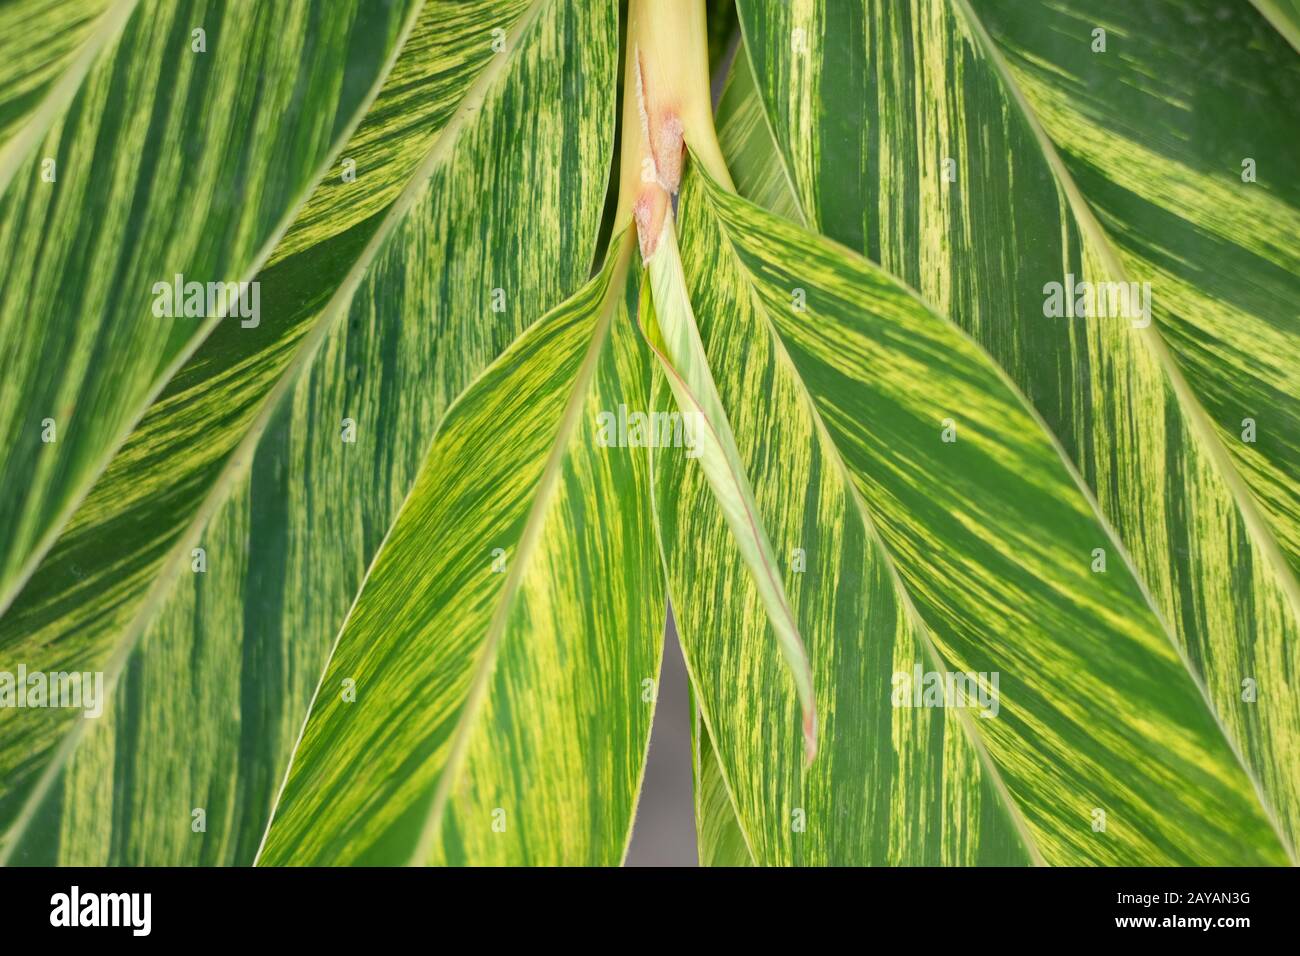 Decorative floral pattern of leaves of ginger lily (Hedychium gardnerianum). Stock Photo